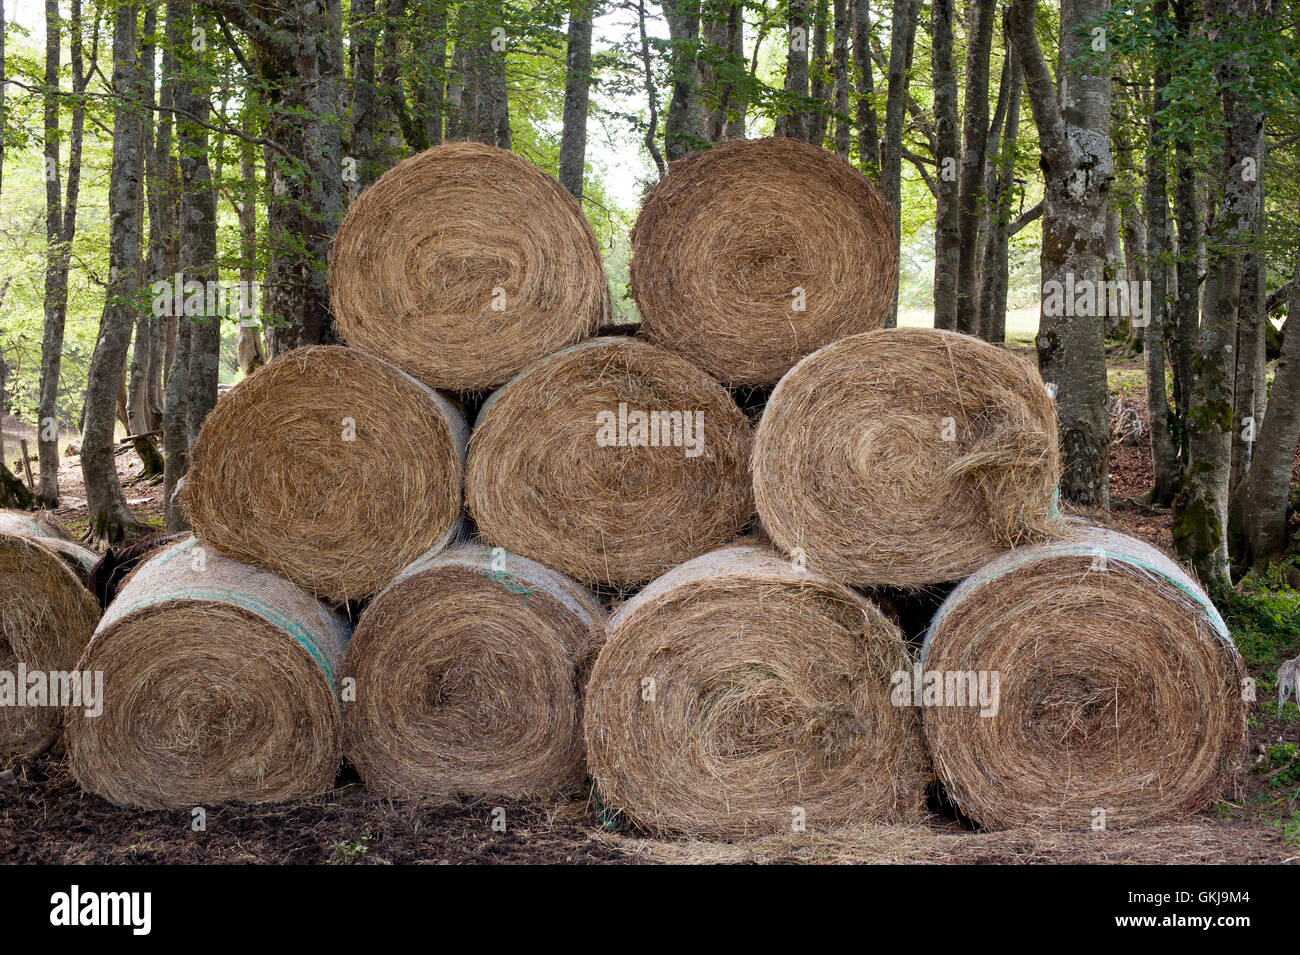 Many round haystack outdoor in farm with wood trunks in background Stock Photo